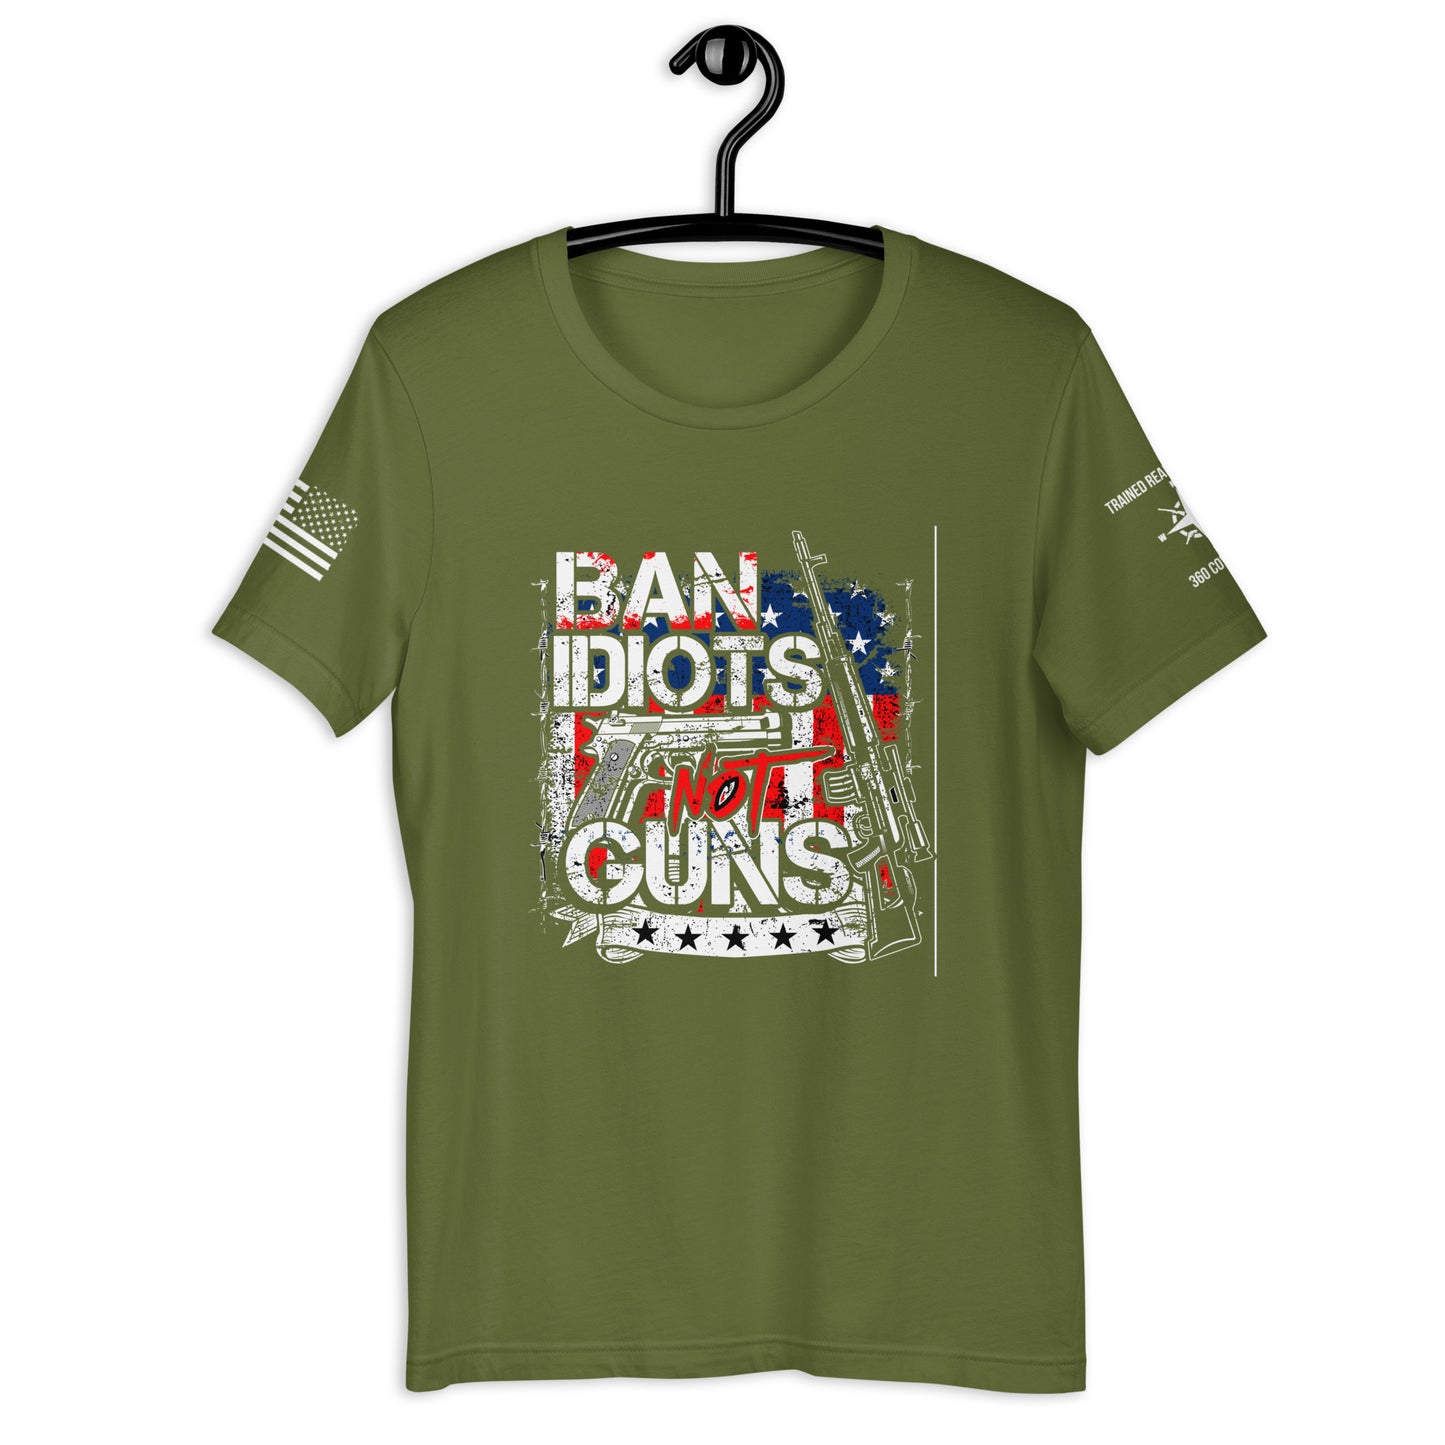 TRA Band Idiots - 2 Men's t-shirt - Trained Ready Armed Apparel